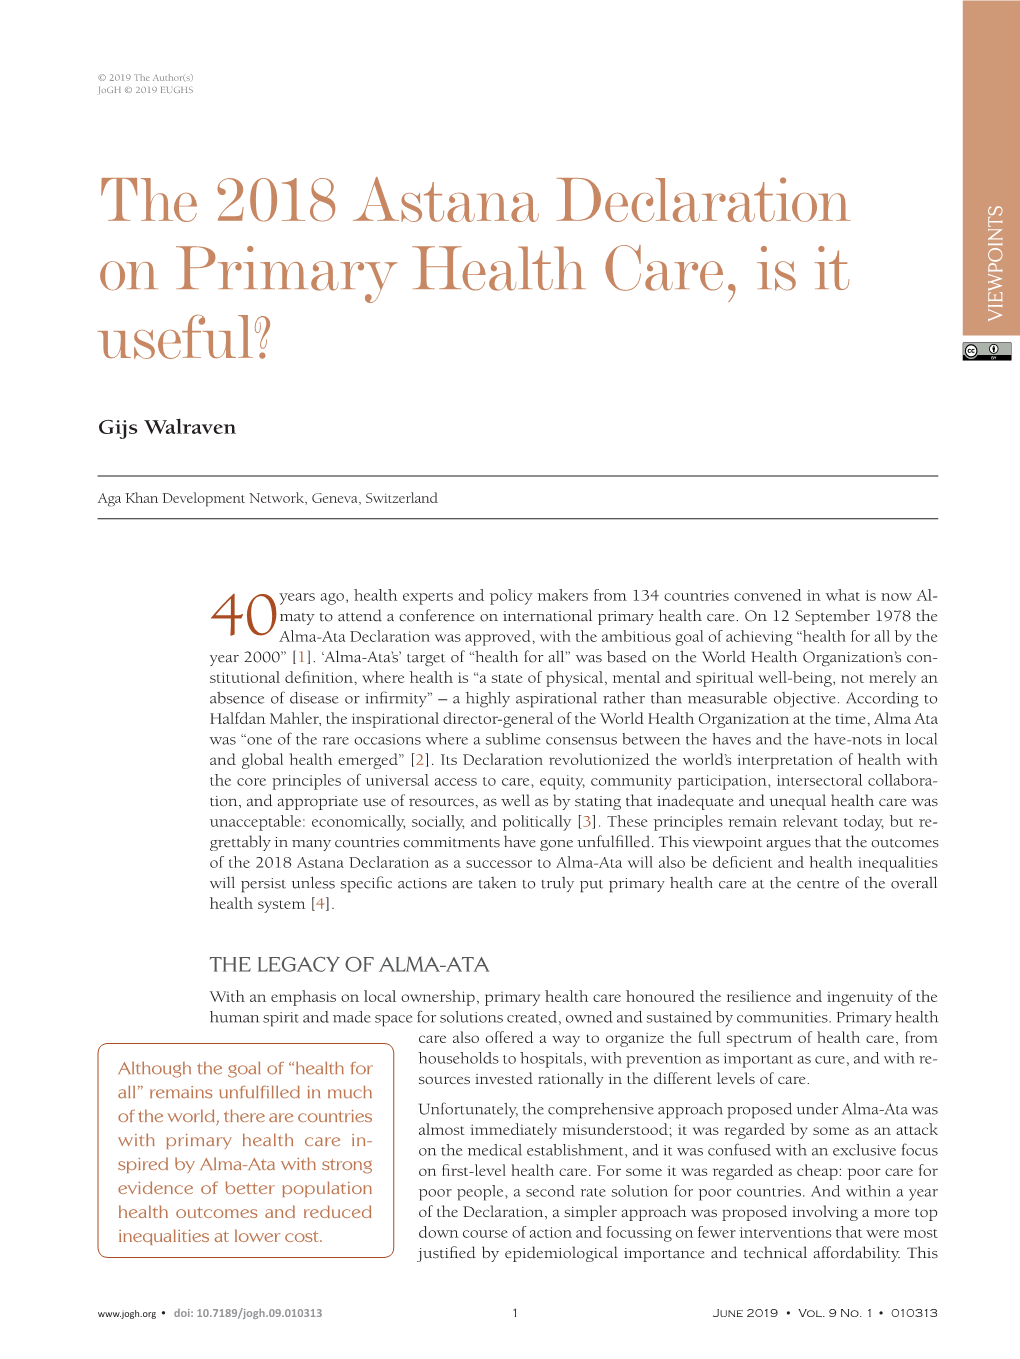 The 2018 Astana Declaration on Primary Health Care, Is It Useful?